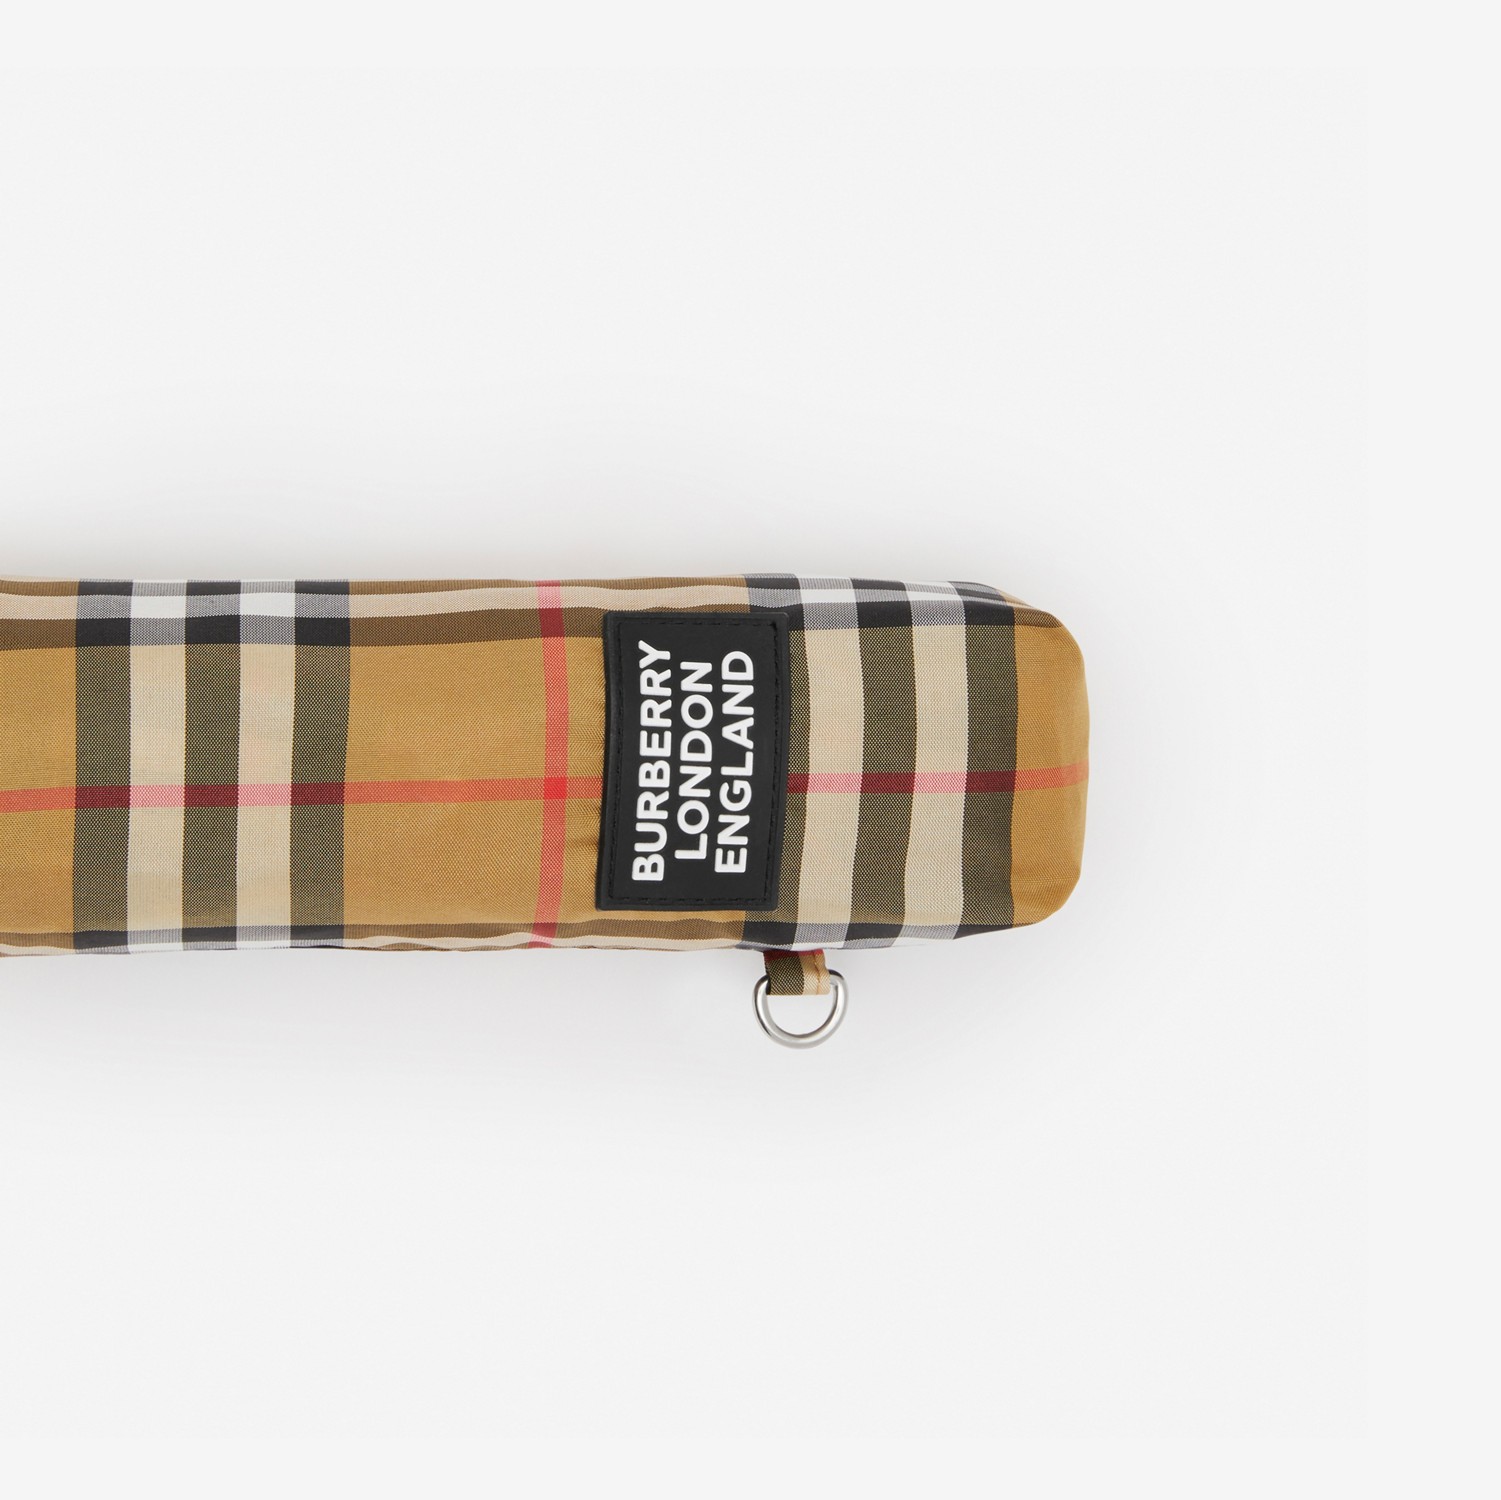 Vintage Check Folding Umbrella in Archive Beige | Burberry® Official